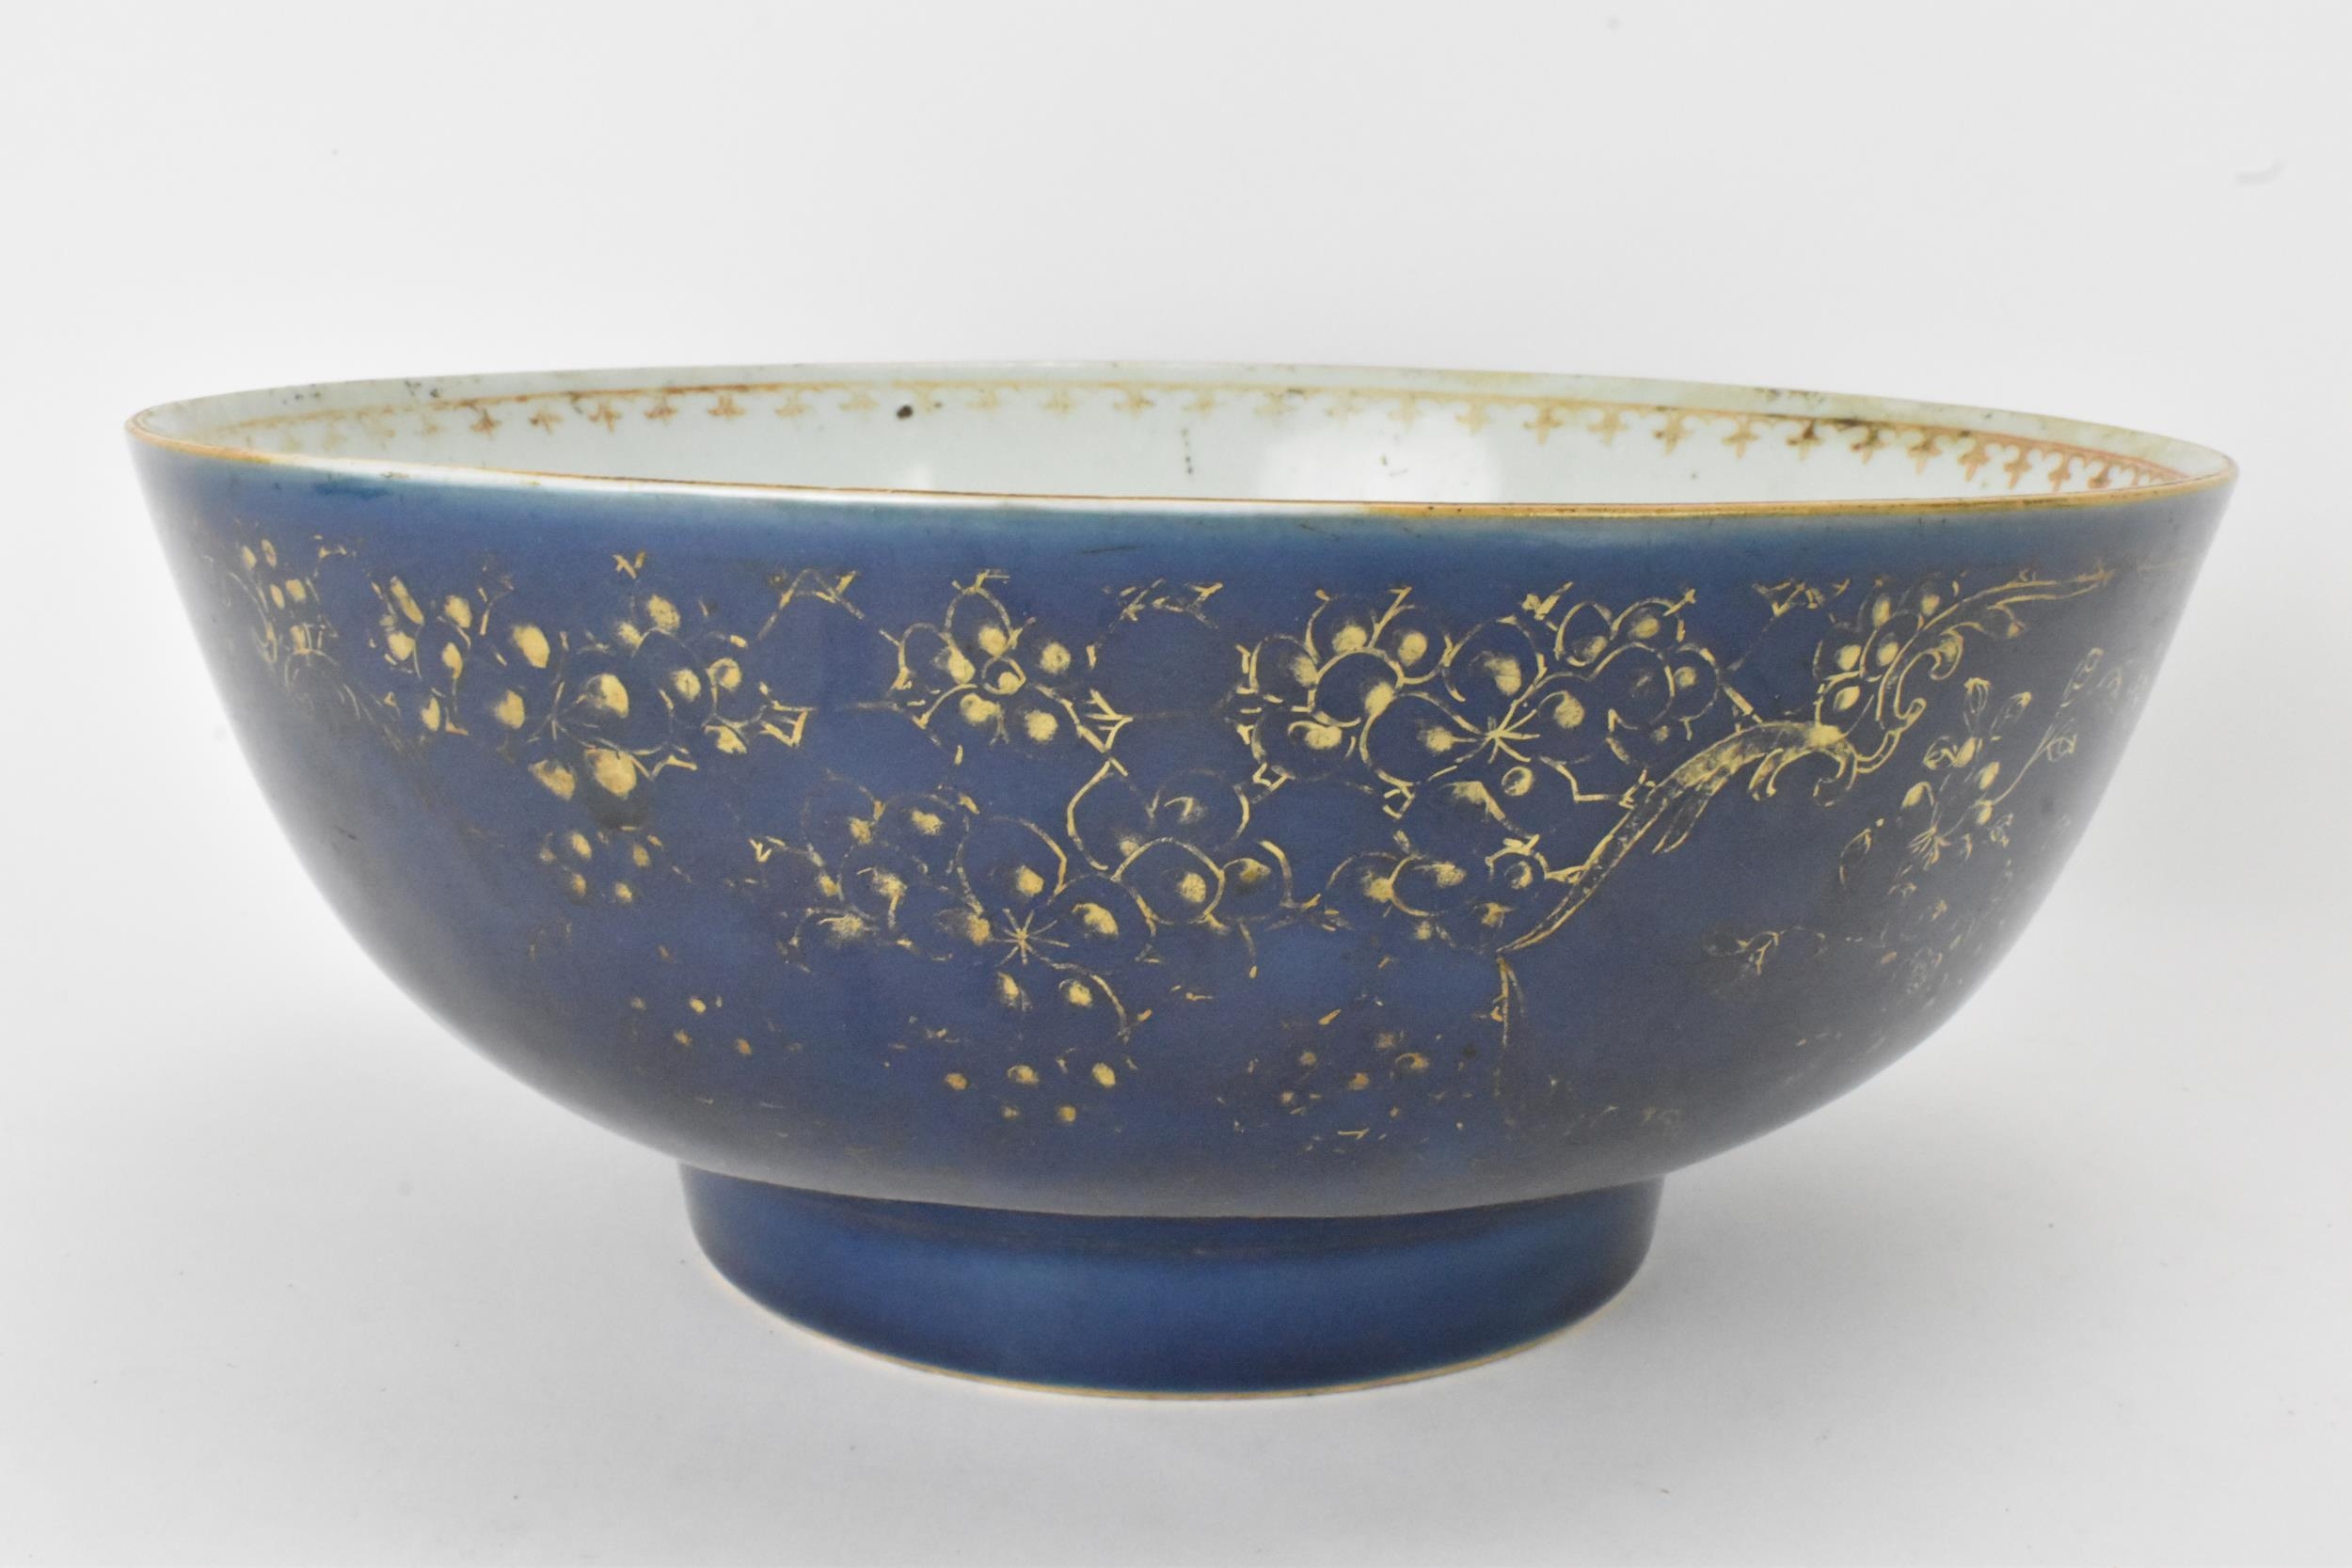 A large Chinese export Qianlong footed bowl, in a powder blue glaze and decorated with gilt flora to